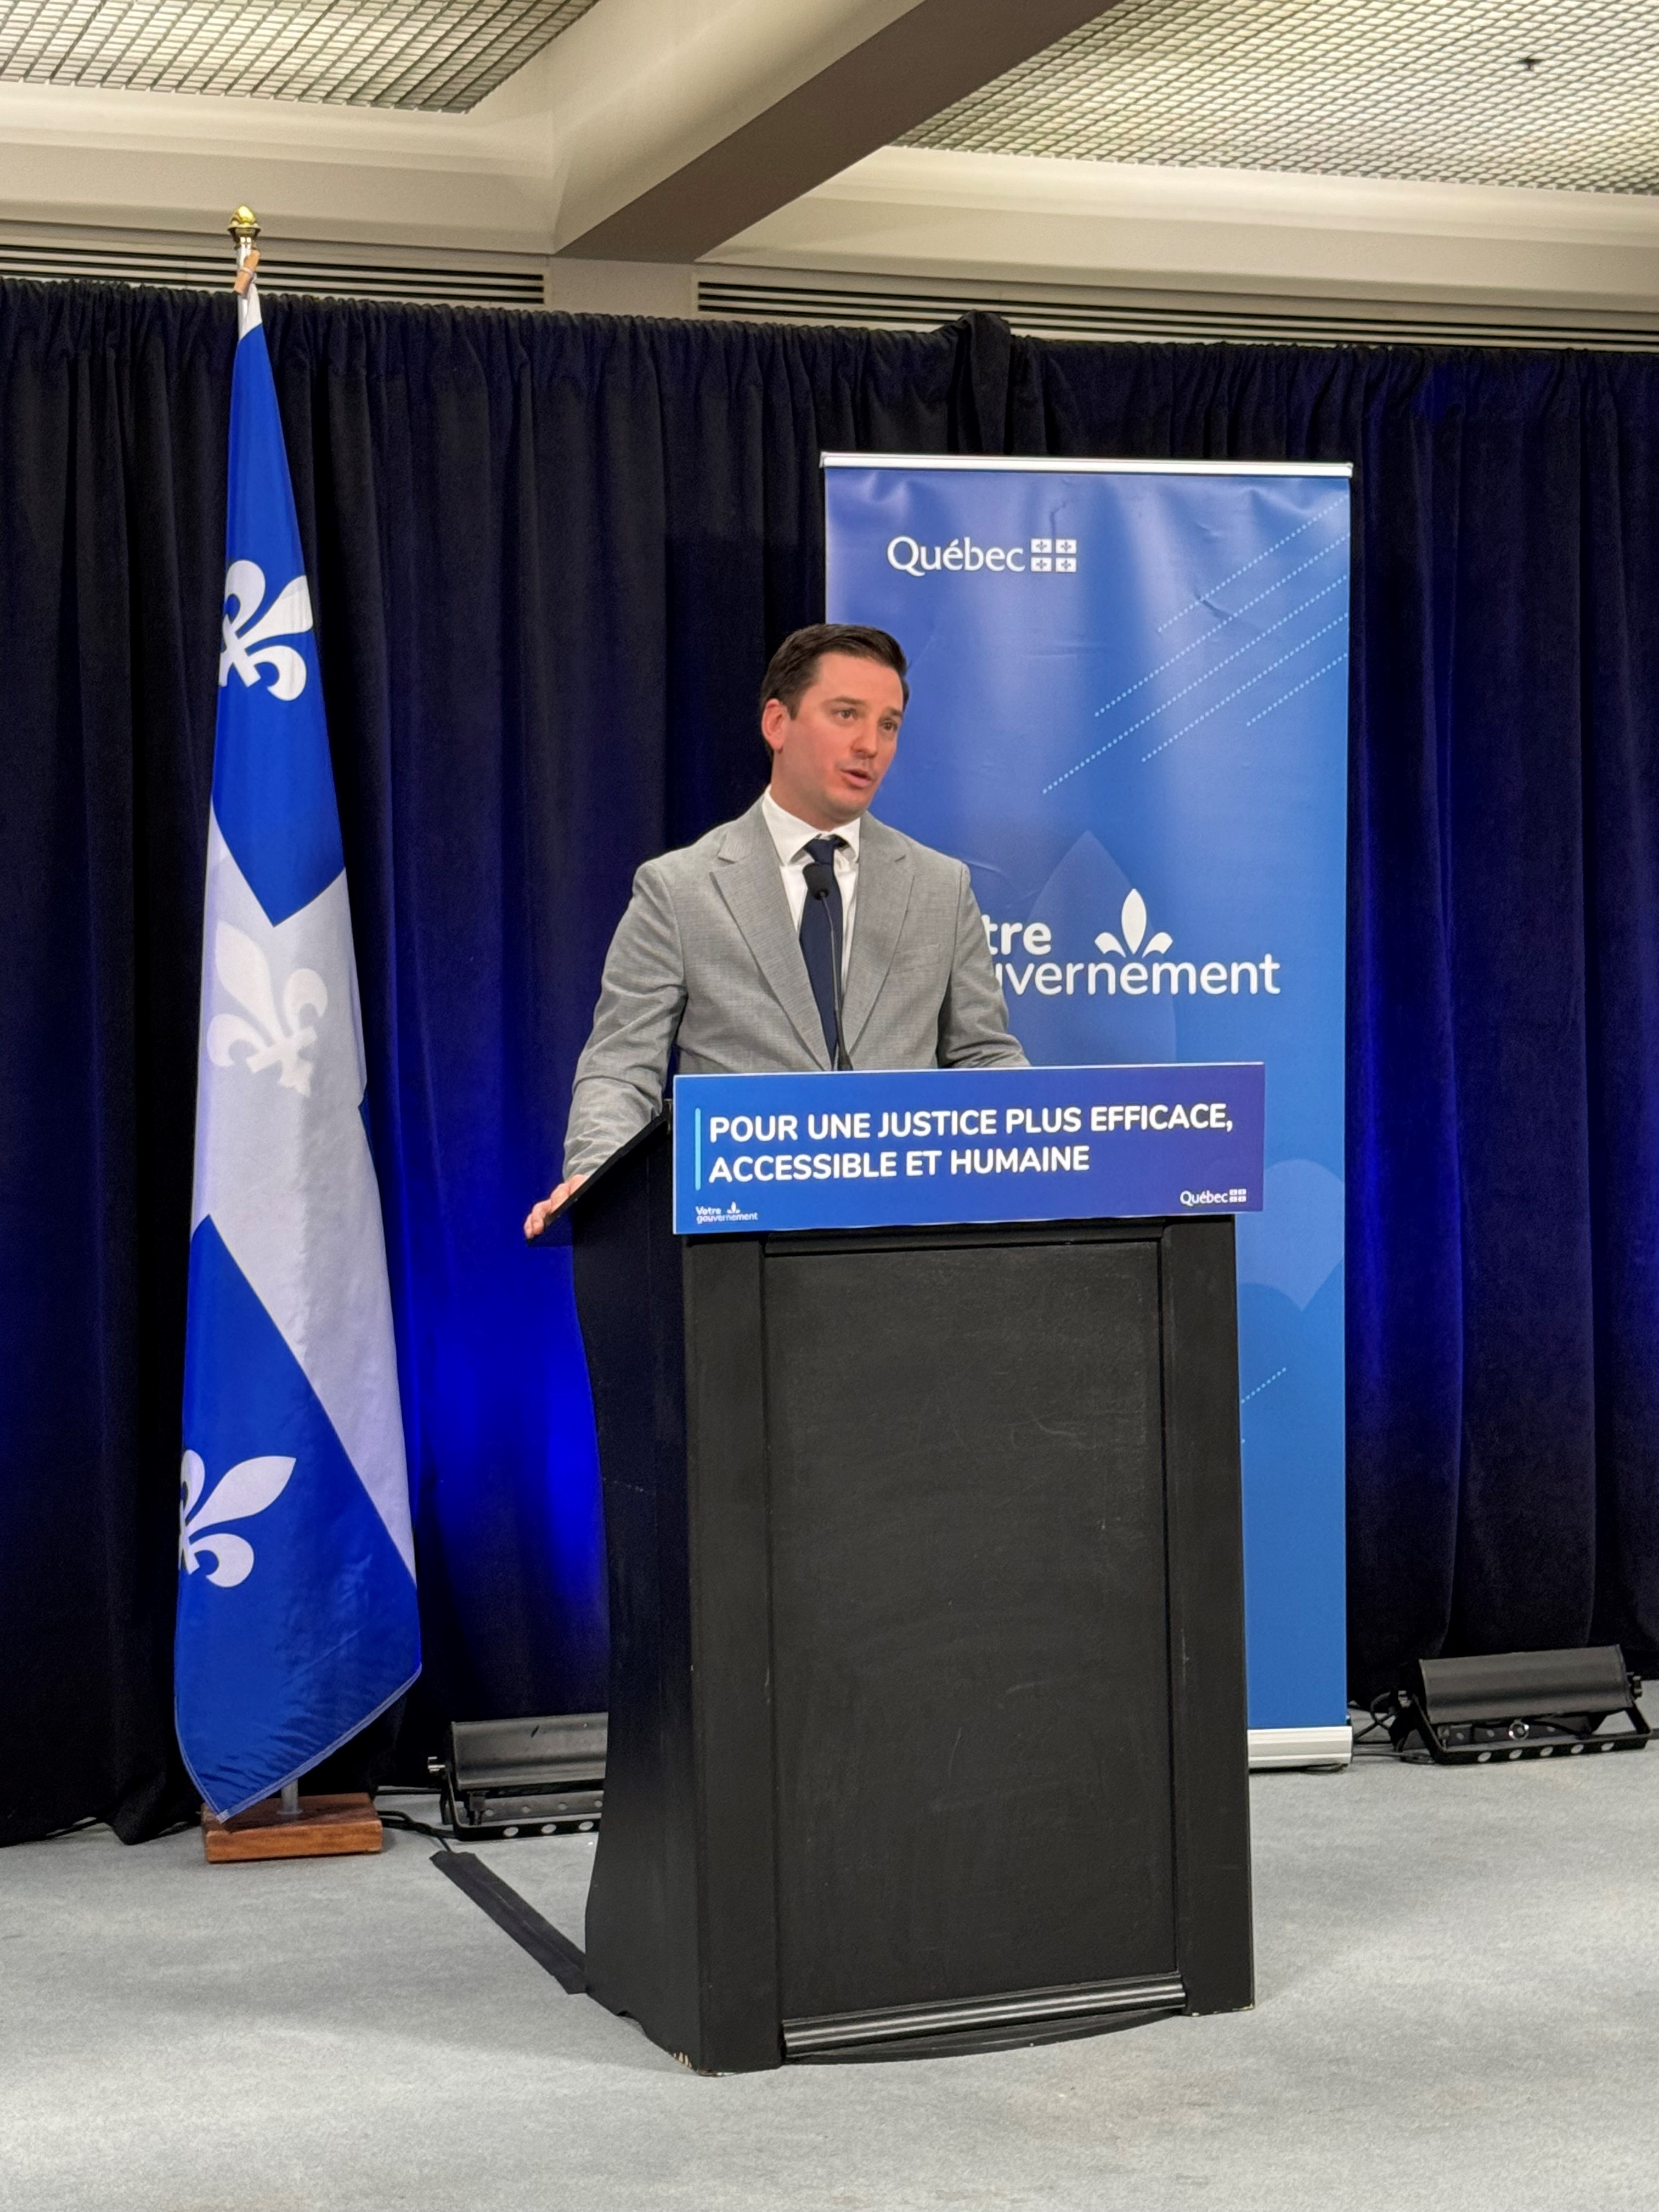 Quebec justice minister making changes to reduce court delays